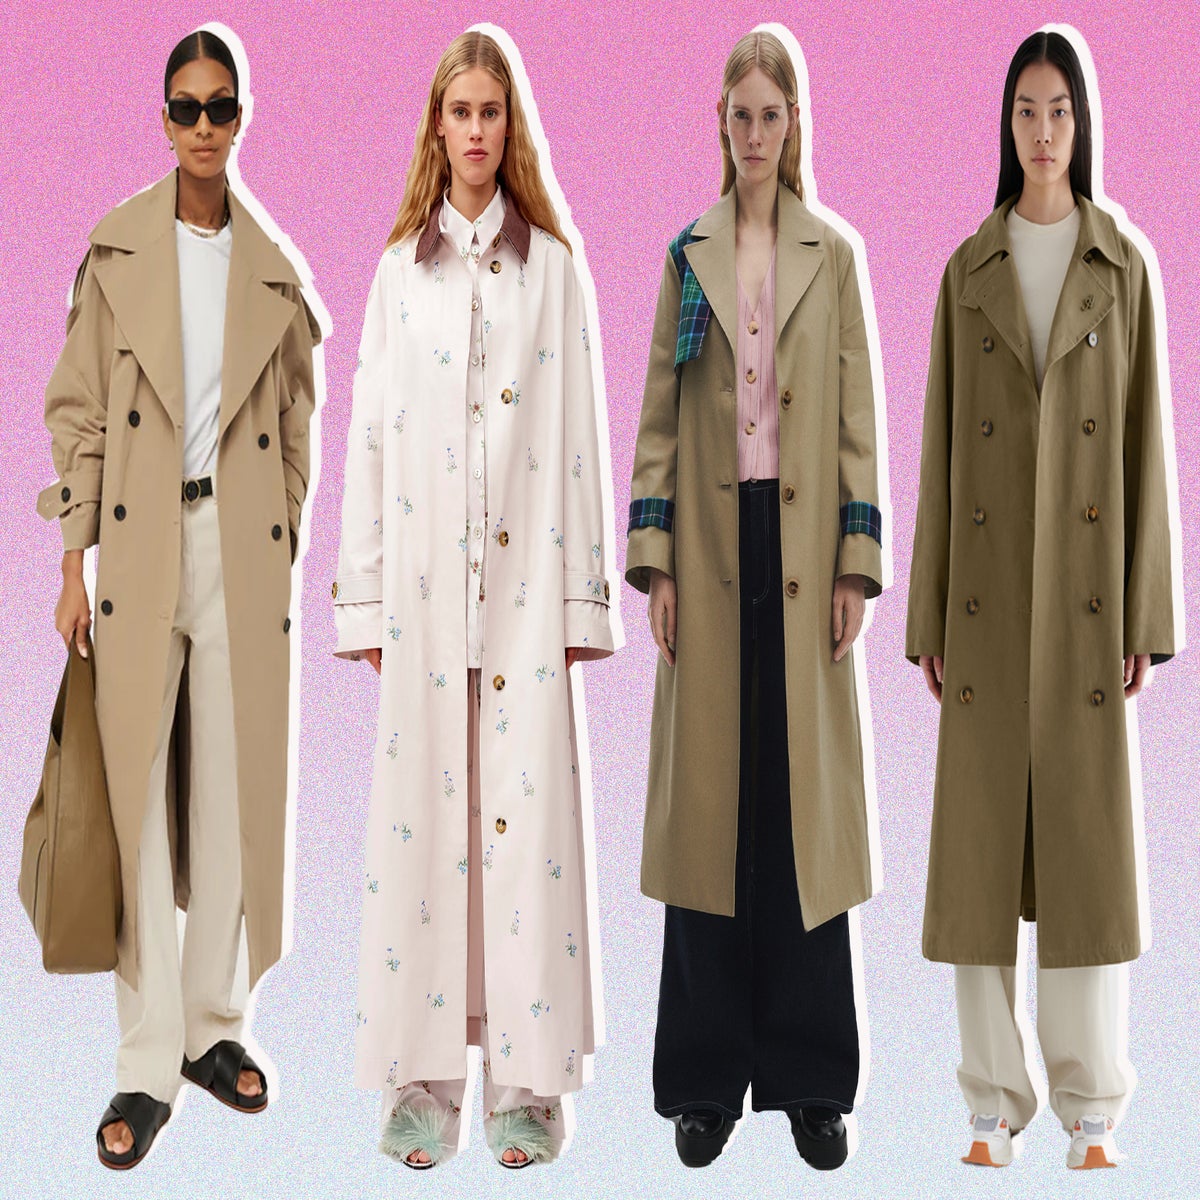 Long Trench Coats for Women, Wool, Leather & More